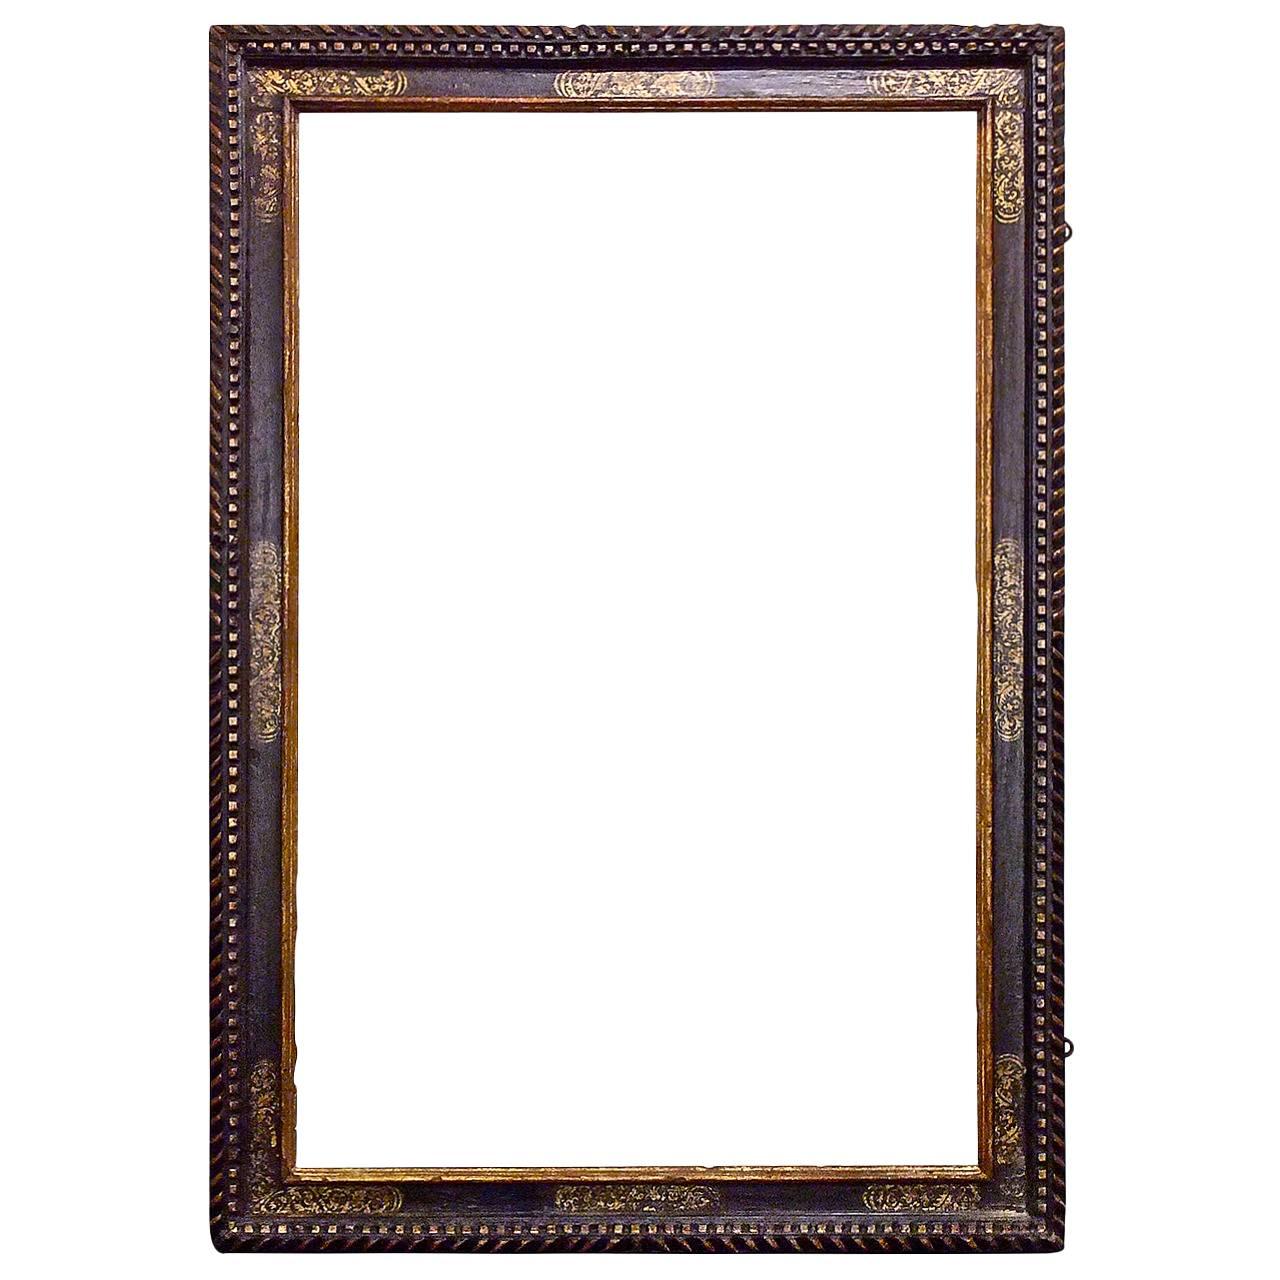 5" WIDE Antique Gold Ornate Victoria Baroque Wood Picture Frame 801G 